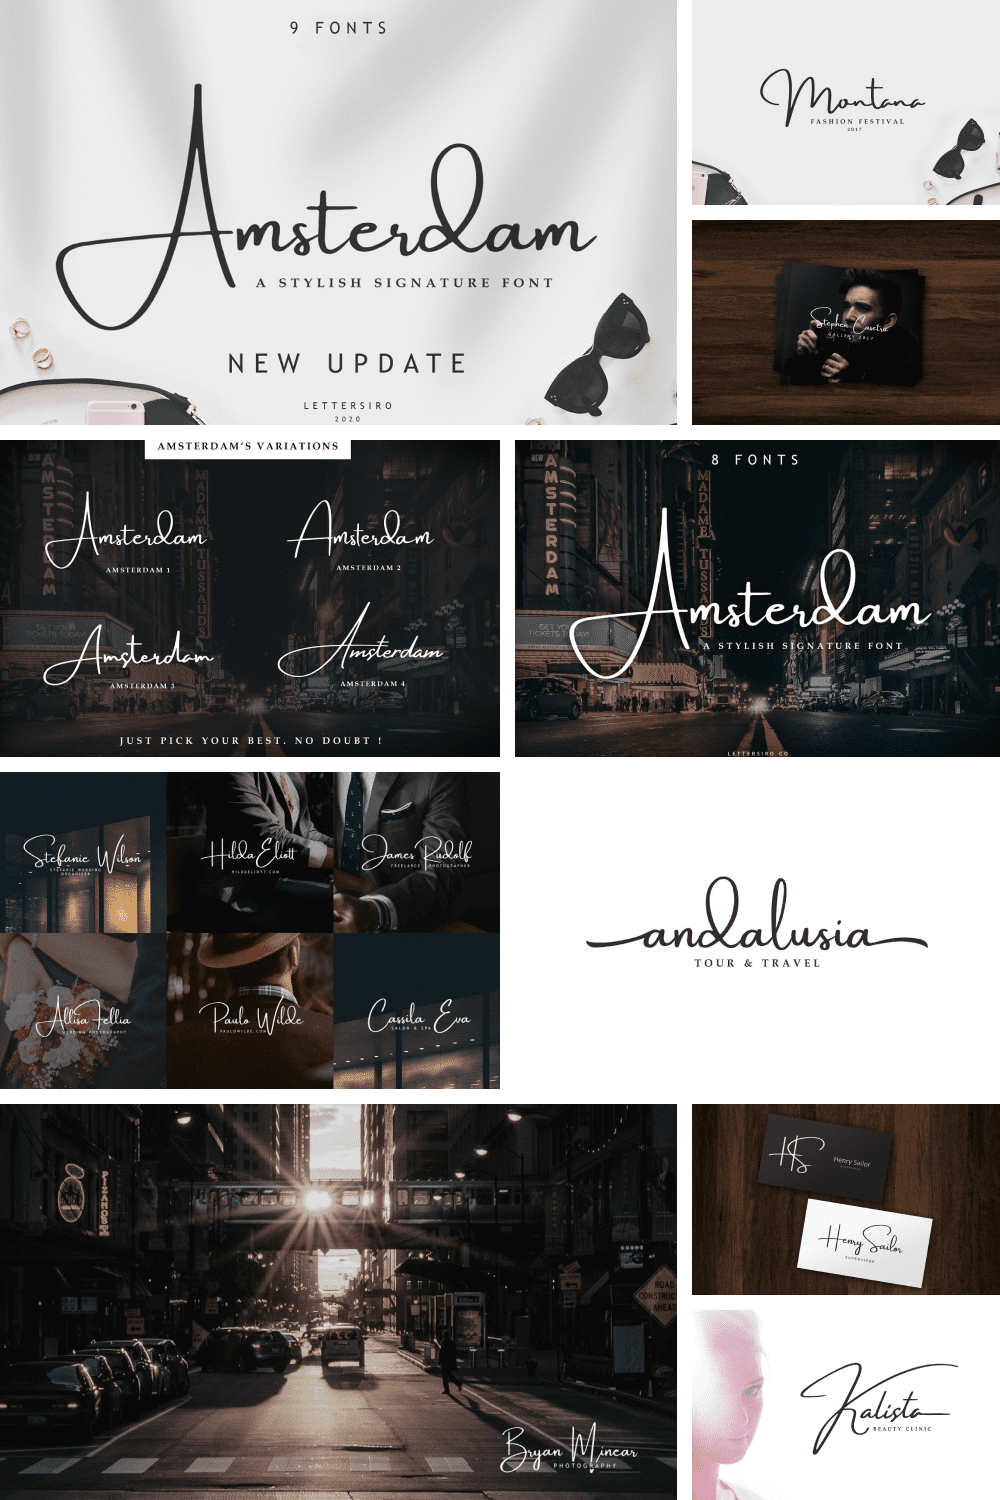 The Amsterdam font is a simple and classy font, comes with elegant variations.